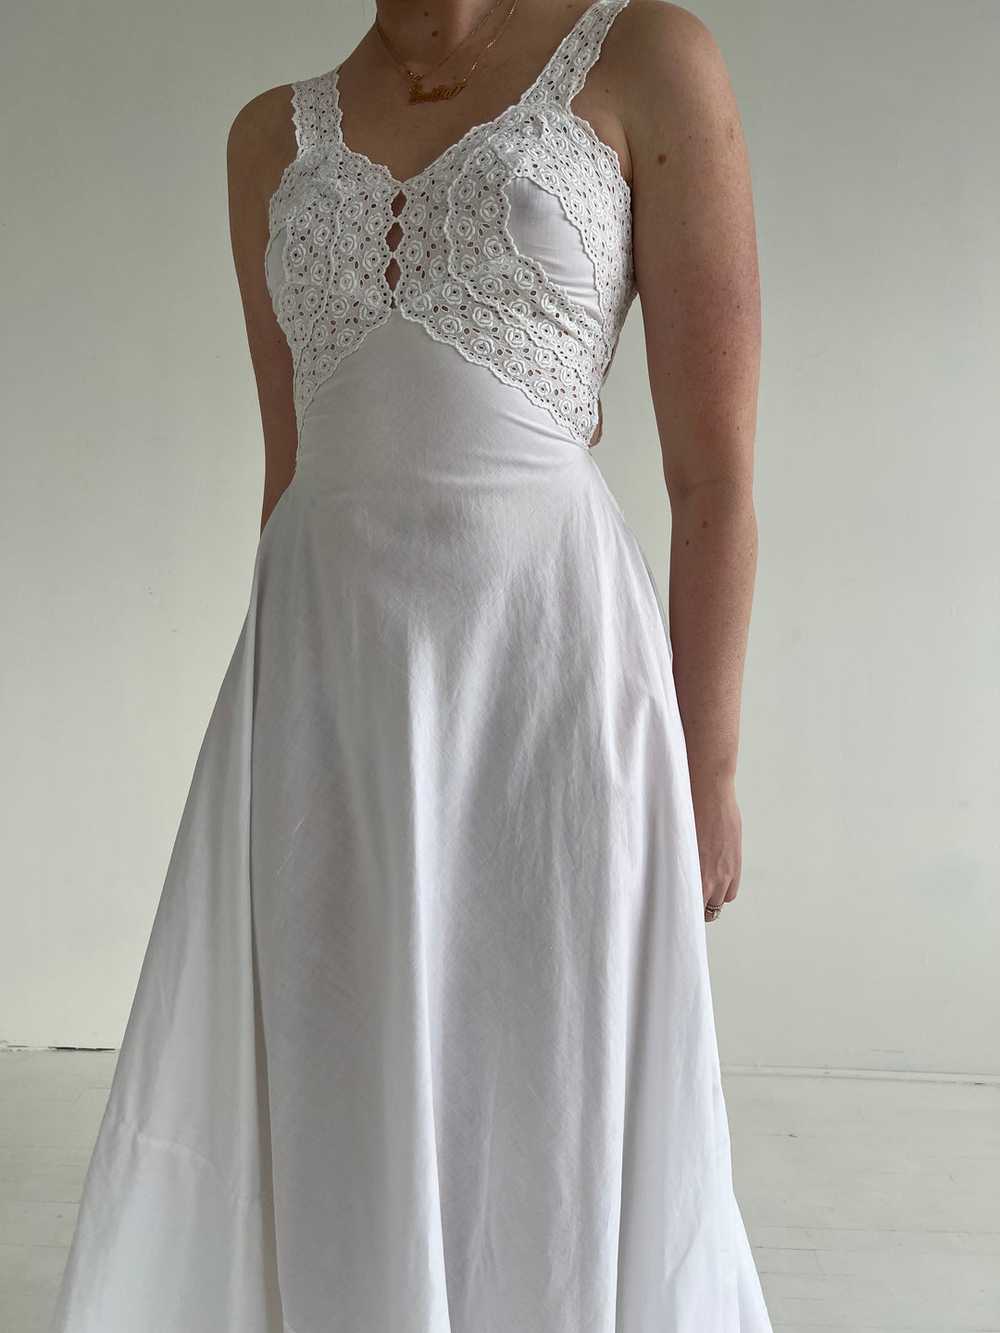 1970's Bridal White Cotton Dress with Lace - image 1